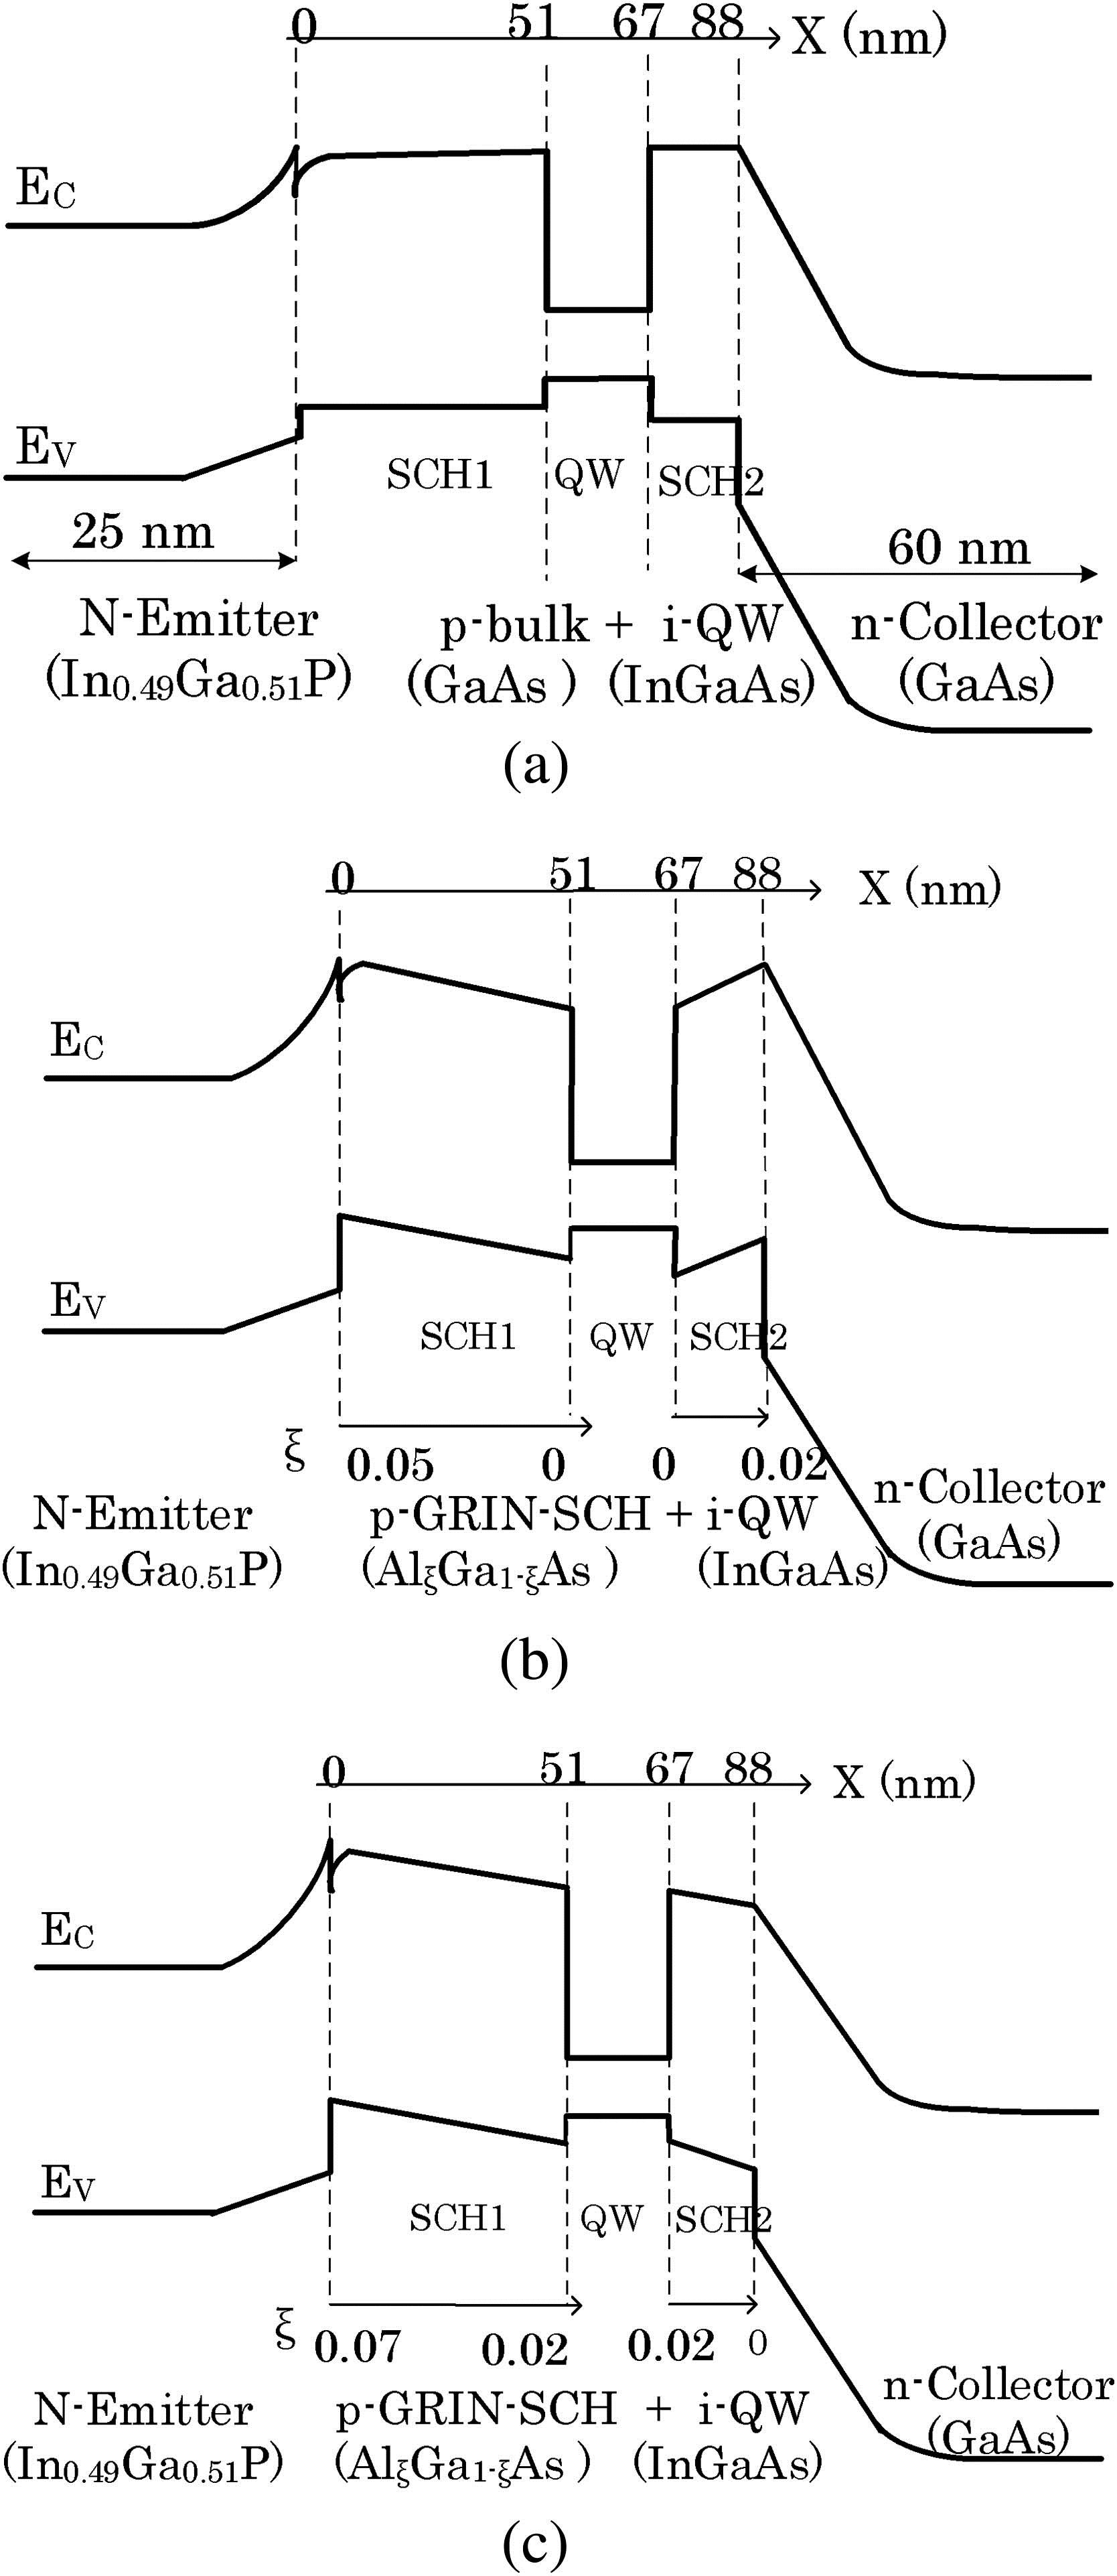 Schematic energy band diagram of (a) the primary TL proposed by Feng and Holonyak[3] (first structure), (b) first proposed GRIN-SCH structure, (second structure), and (c) second proposed GRIN-SCH structure (third structure) under forward bias. Slope of the band diagram in SCH1 and SCH2, which determines the magnitude of the quasi-electric field.